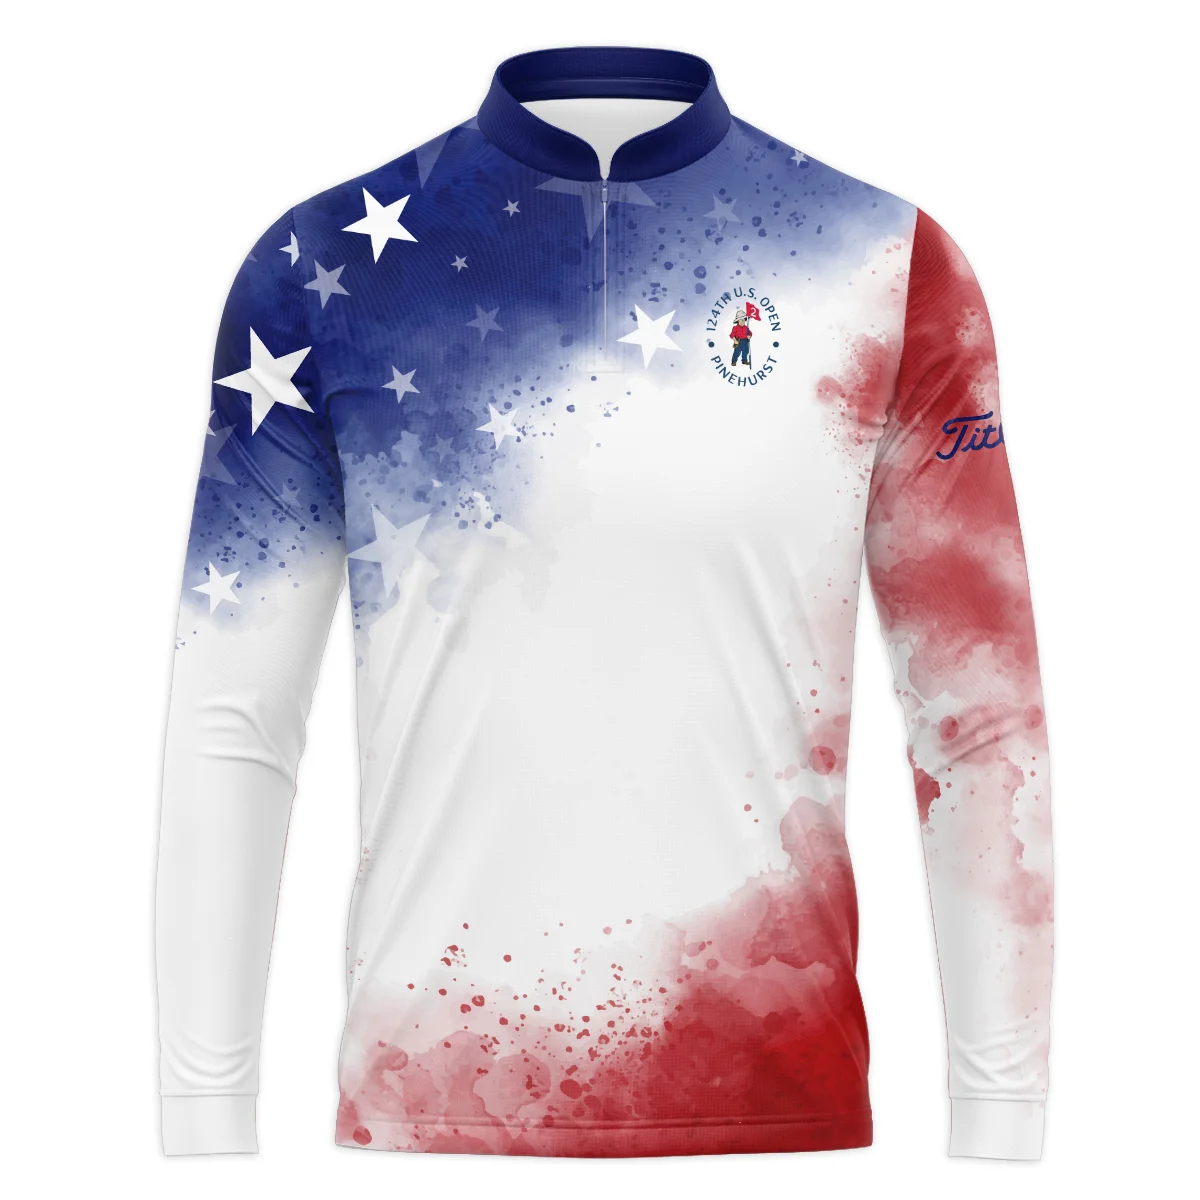 124th U.S. Open Pinehurst Titleist Blue Red Watercolor Star White Backgound Style Classic, Short Sleeve Round Neck Polo Shirt